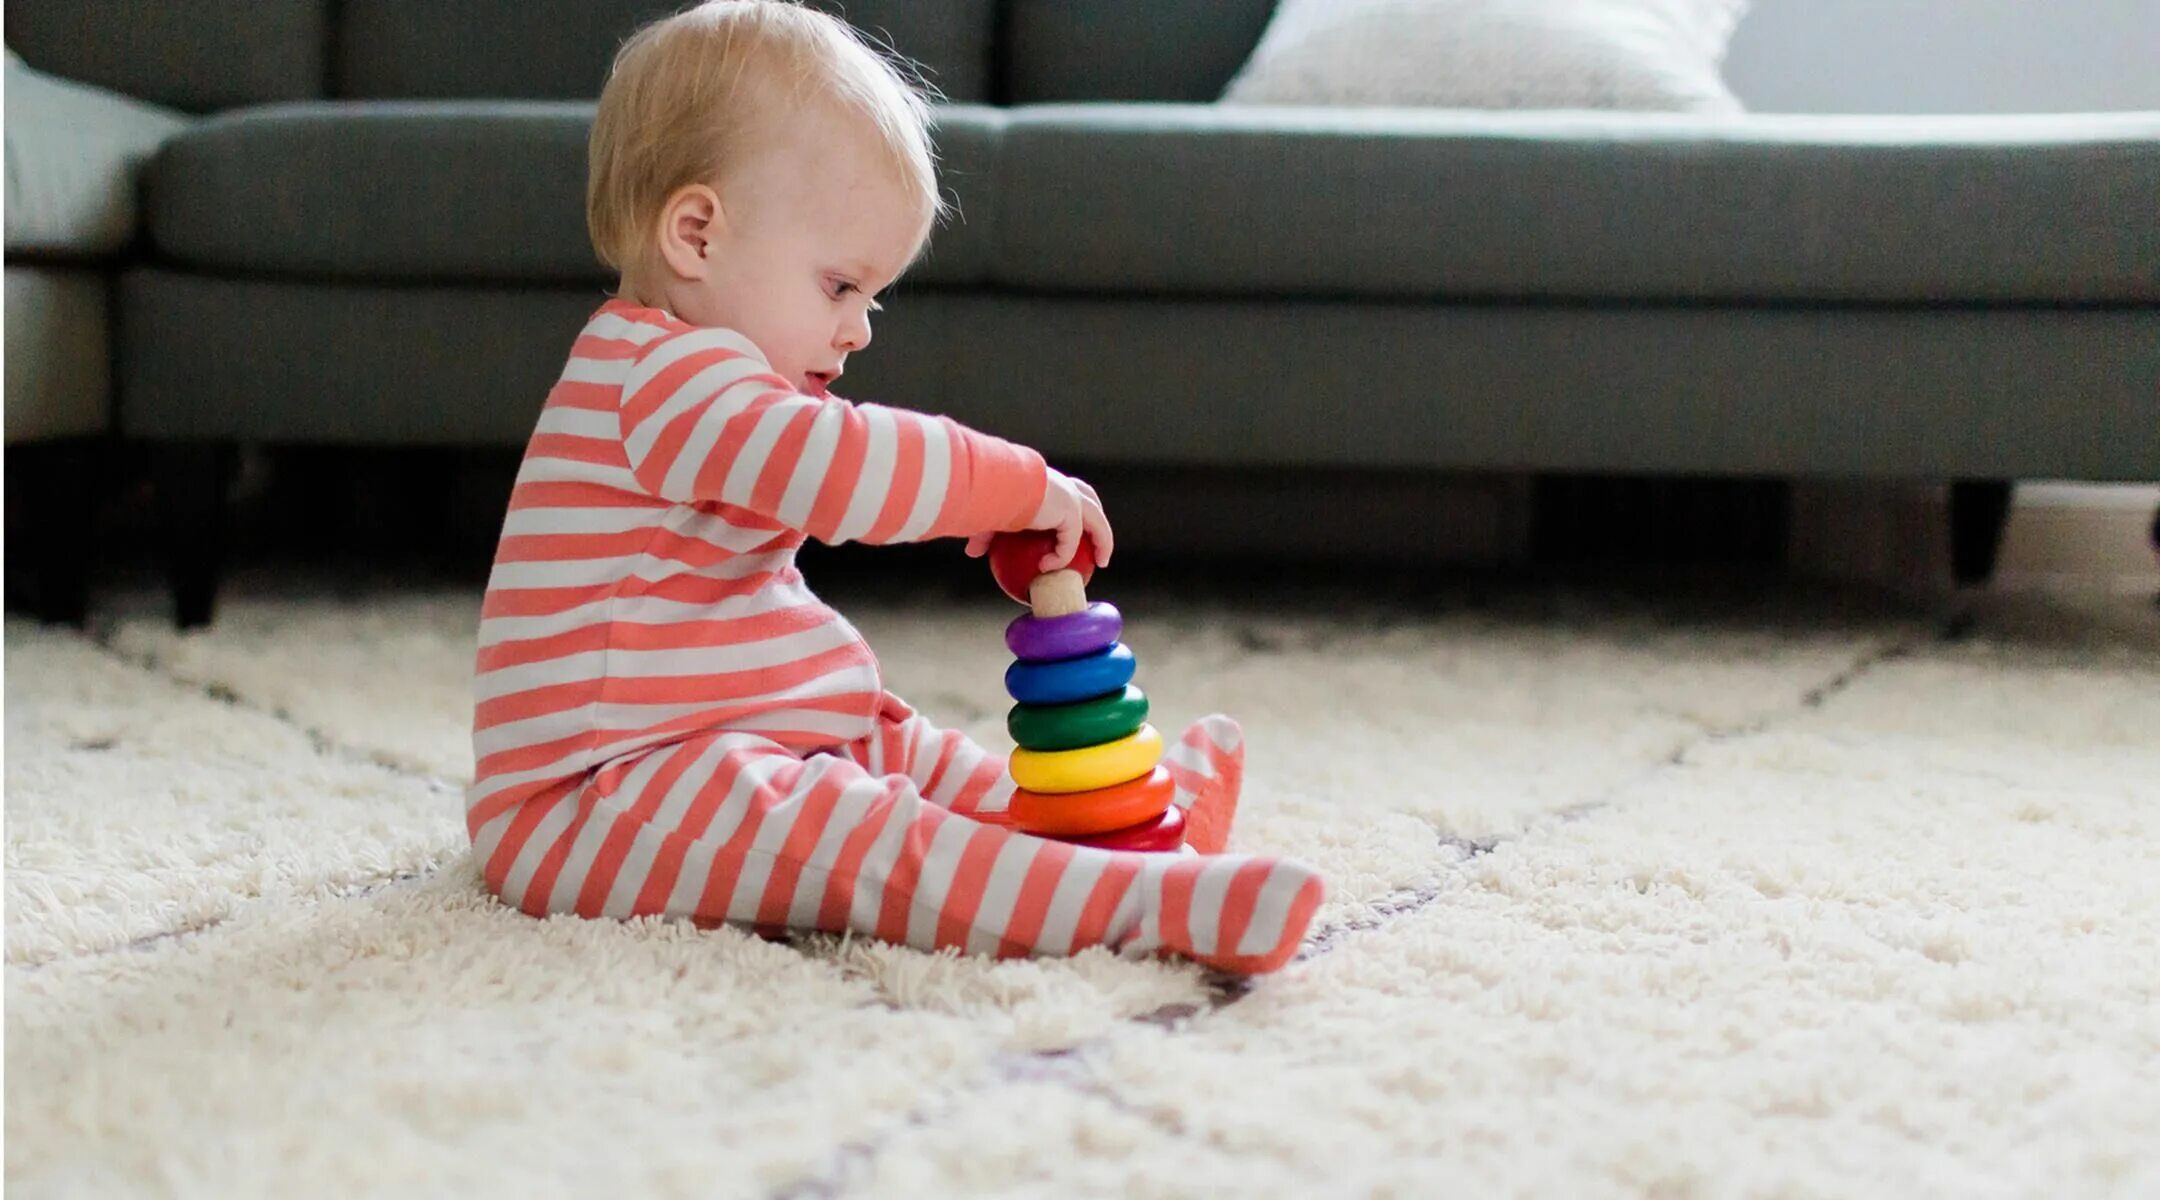 Baby playing with Toys. Child playing with Toys. Cute Baby sitting.